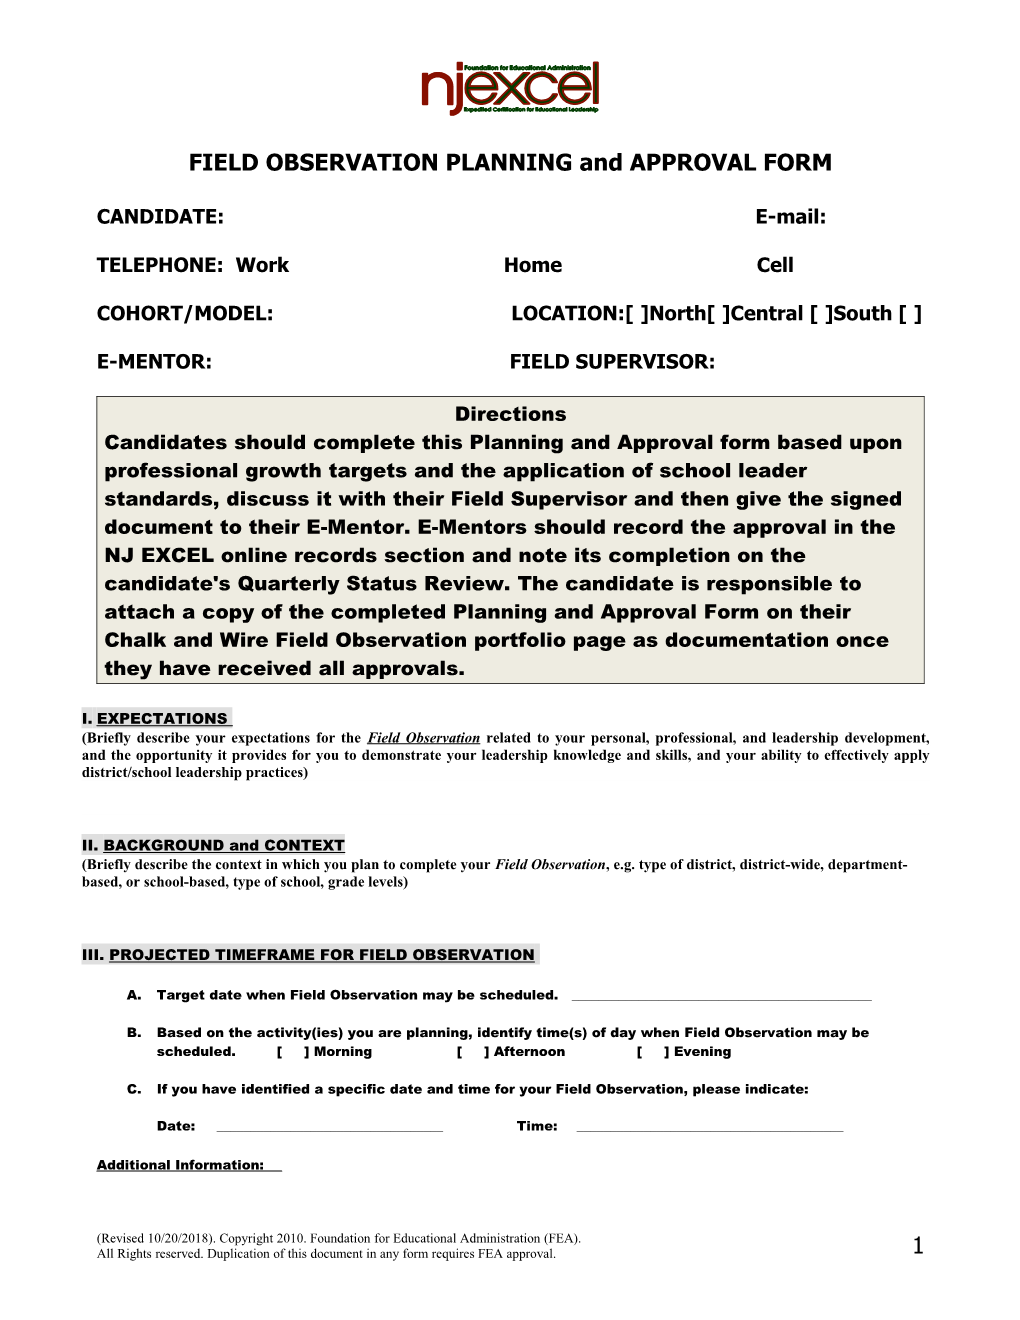 FIELD OBSERVATION PLANNING and APPROVAL FORM